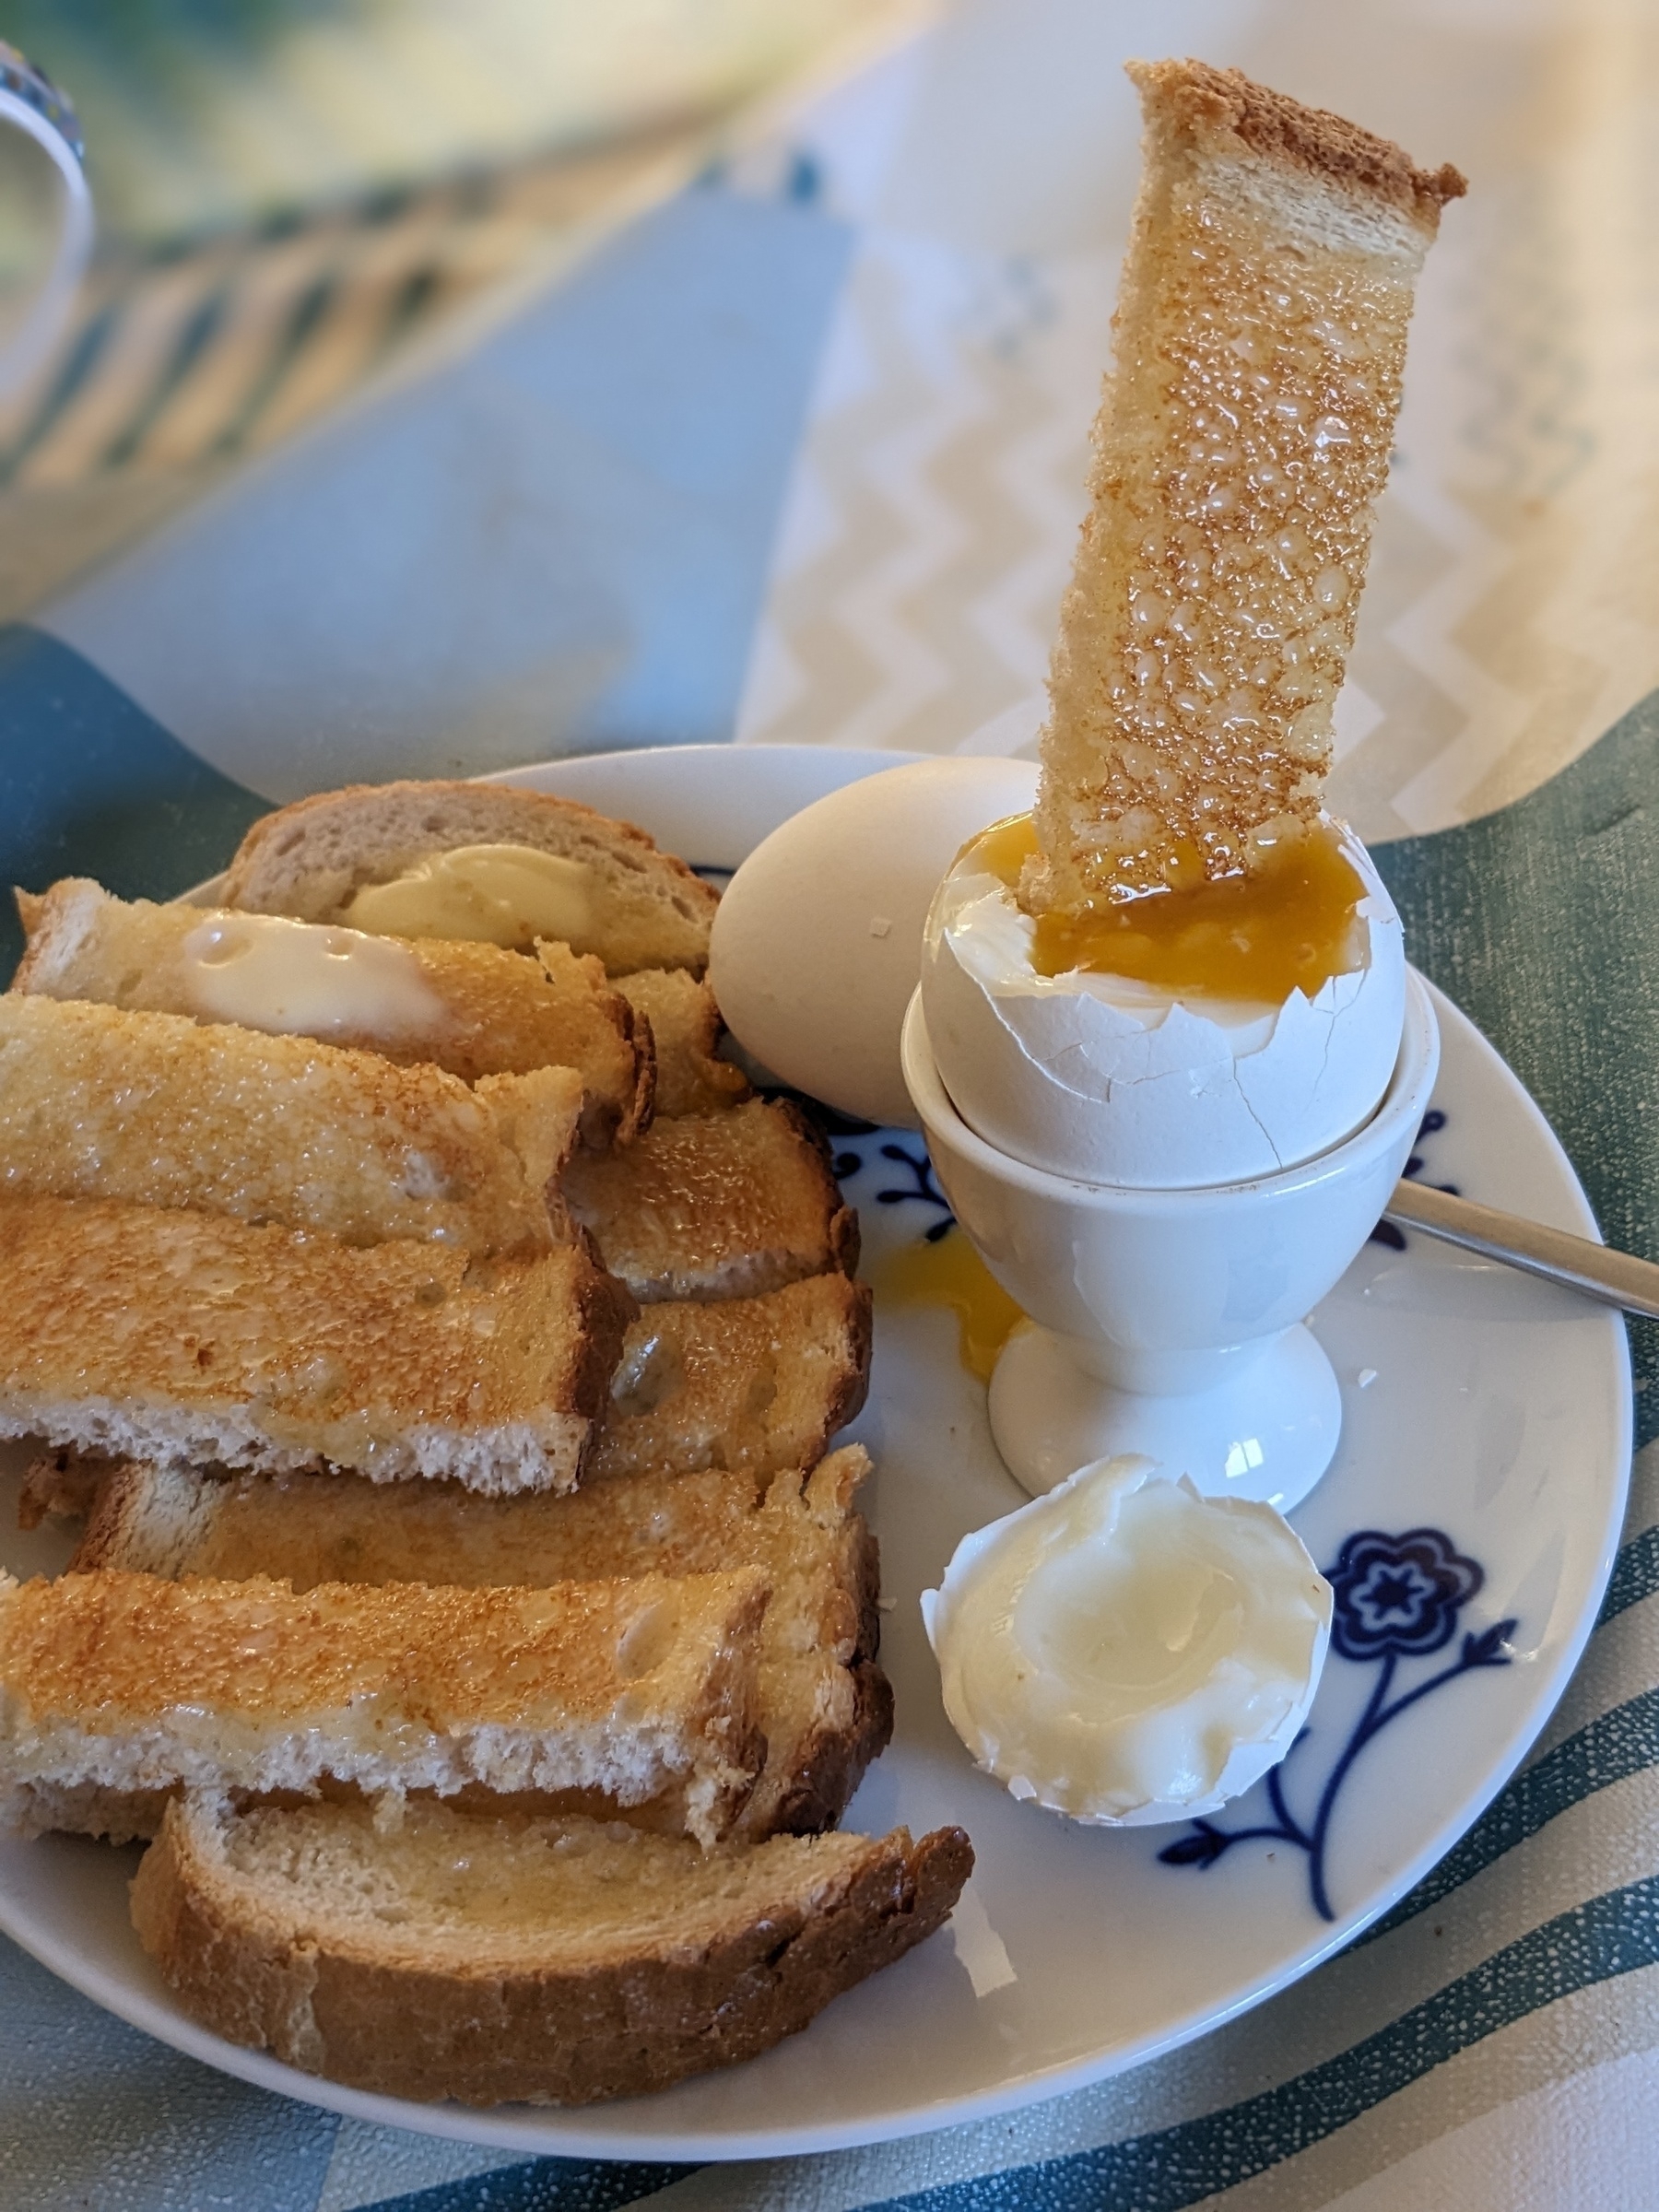 Soft-boiled egg with a toast 'soldier'